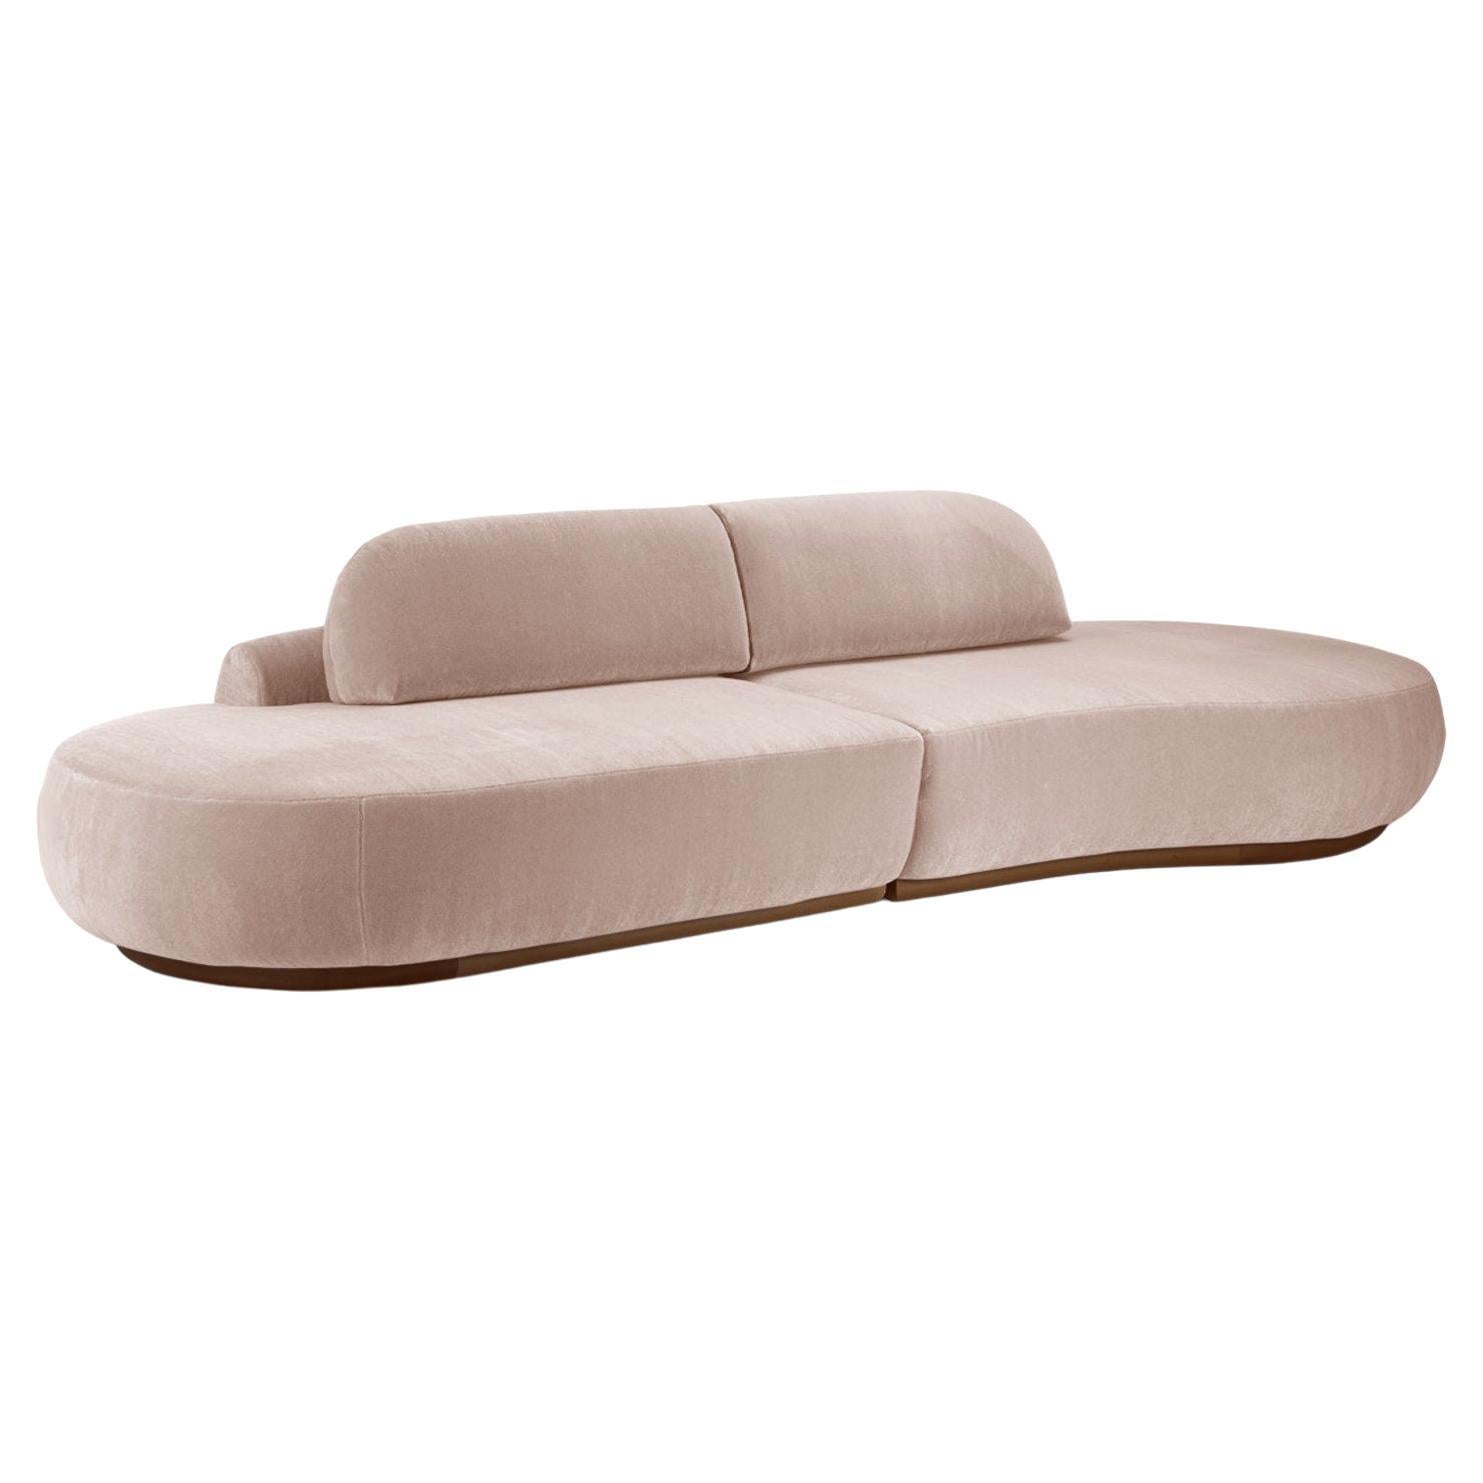 Naked Curved Sectional Sofa, 2 Piece with Beech Ash-056-1 and Vigo Blossom For Sale